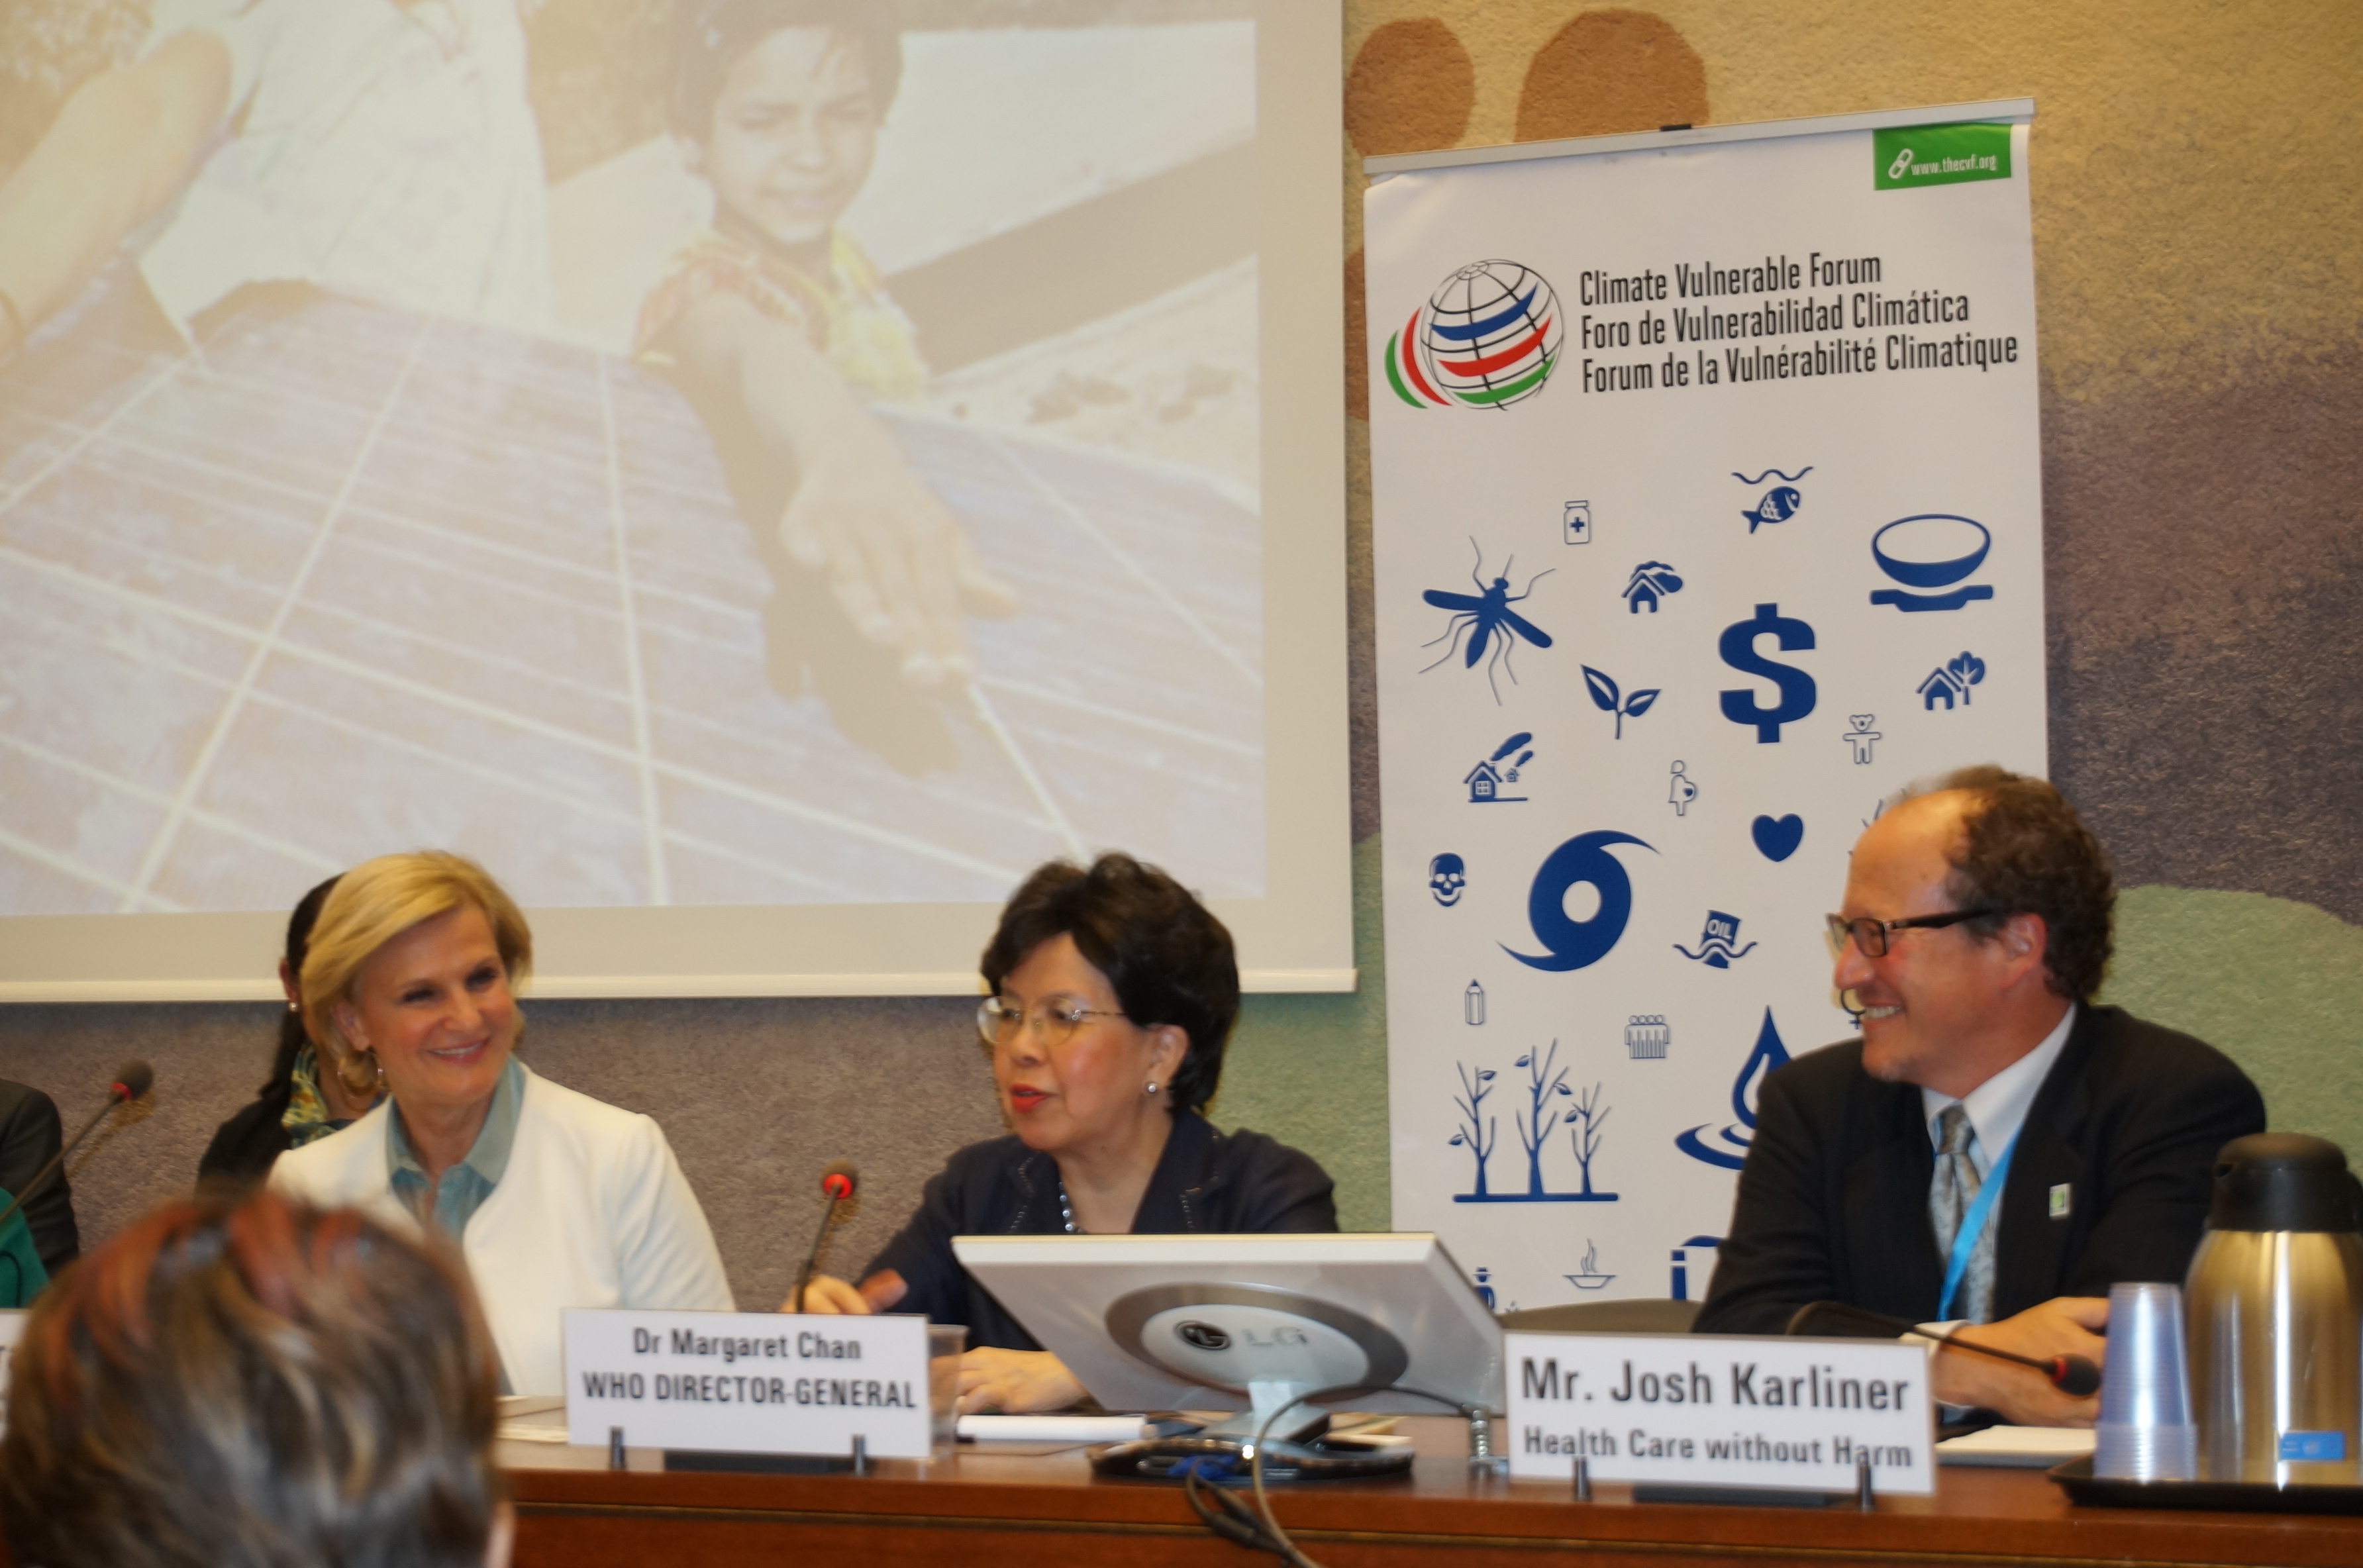 From Left to Right: Dr. Maria Neira, Directorof the Public Health and the Environment Department; Dr. Margaret Chan, General Director of the World Health Organization, and Josh Karliner, Director of Global Projects and International Team Coordinator for Health Care Without Harm